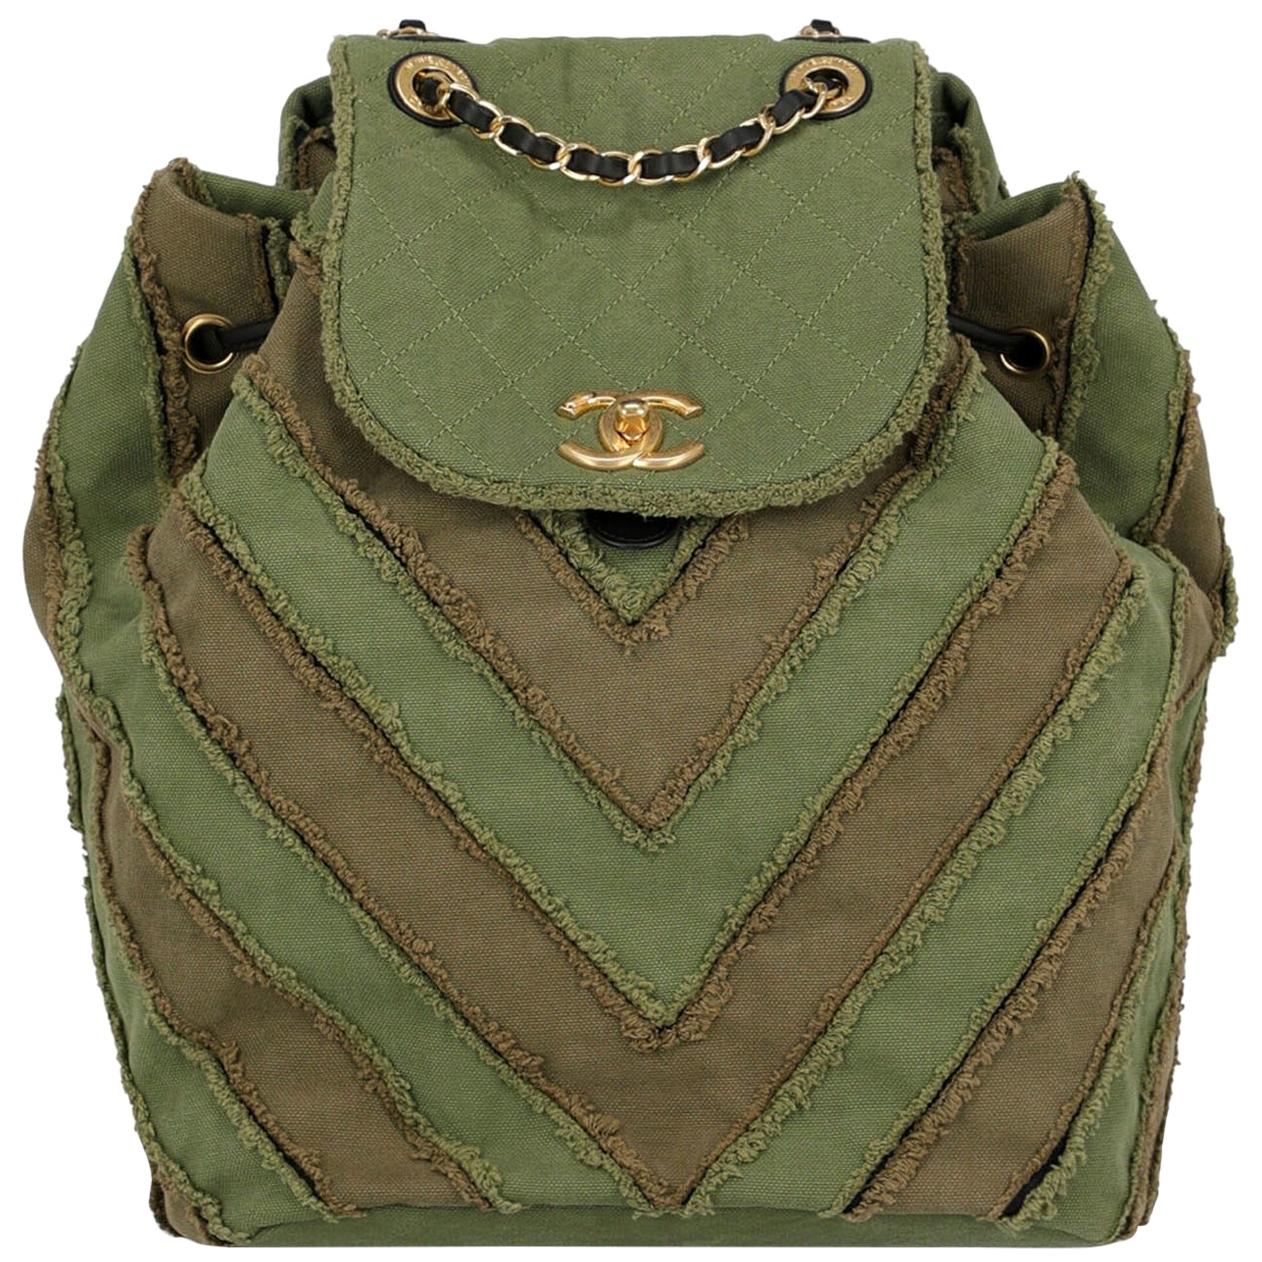 Chanel 2017 Cruise Coco Cuba Collection Green Chevron Pattern Backpack